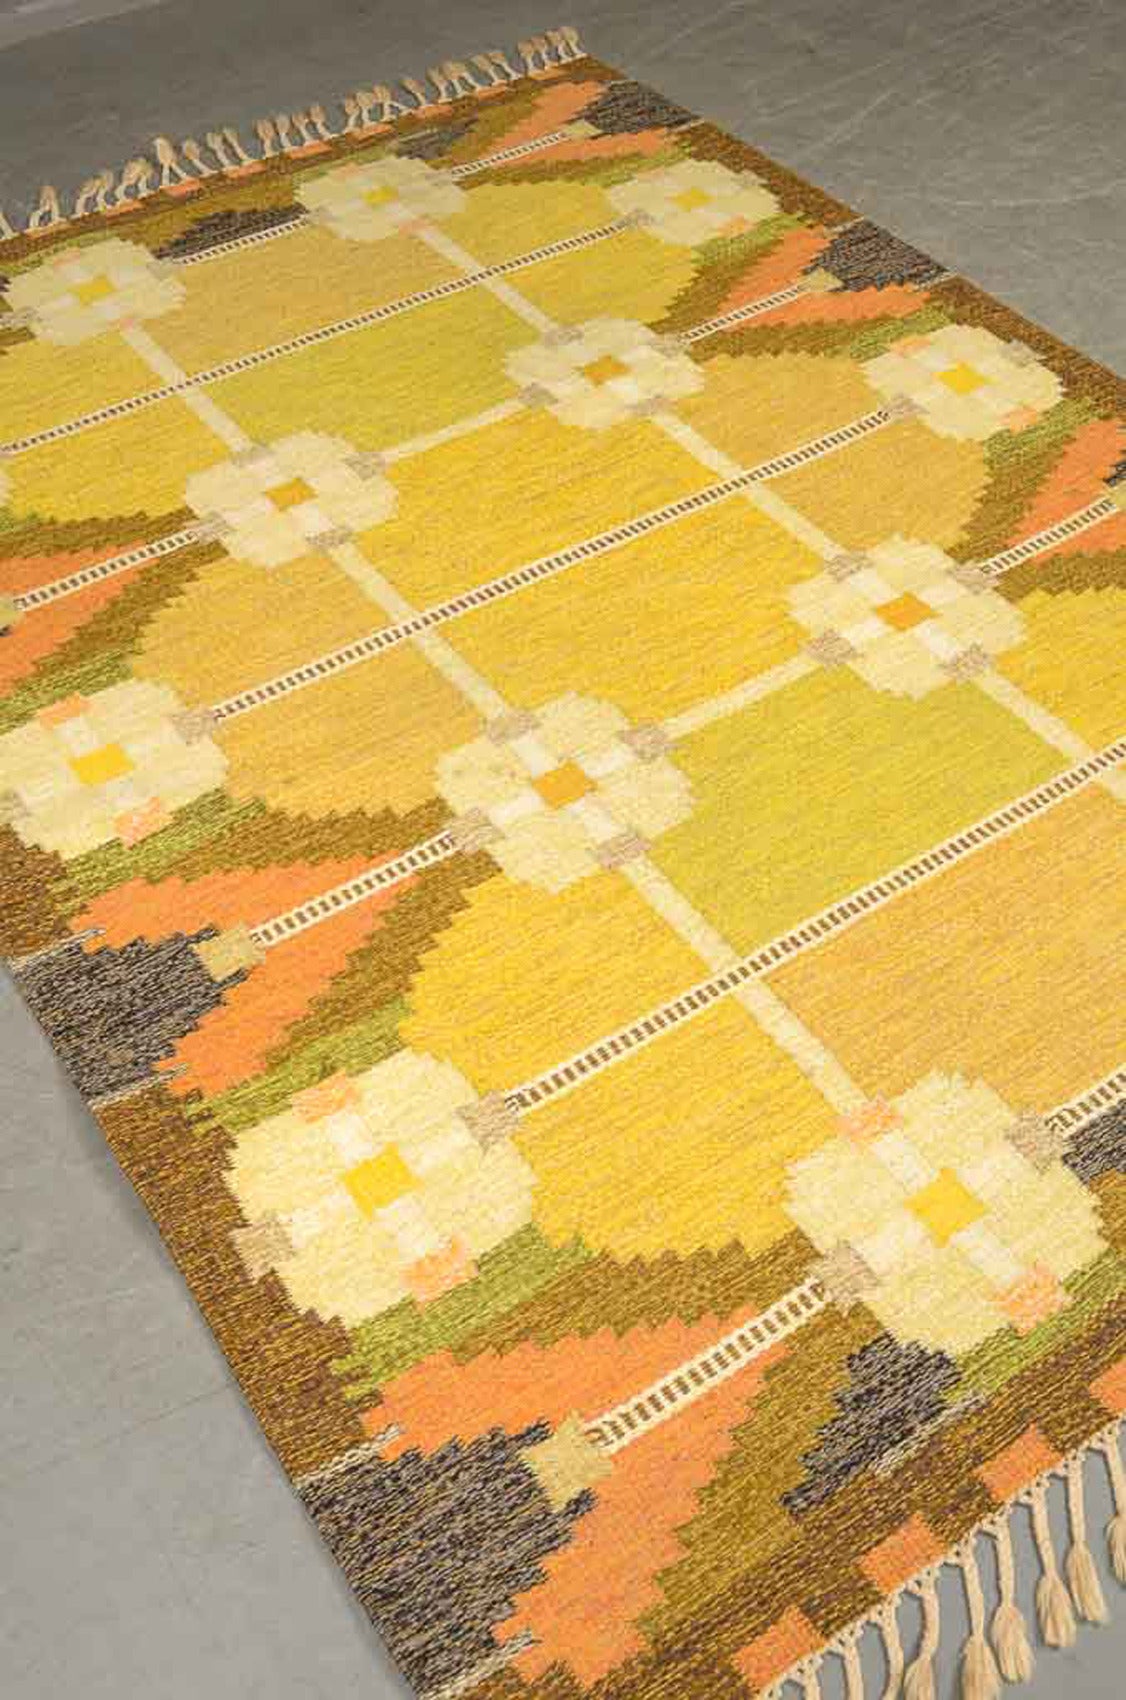 Swedish Rollakan 'flat-woven' floor rug, 1960s-1970s. The rug woven with geometric patterns.